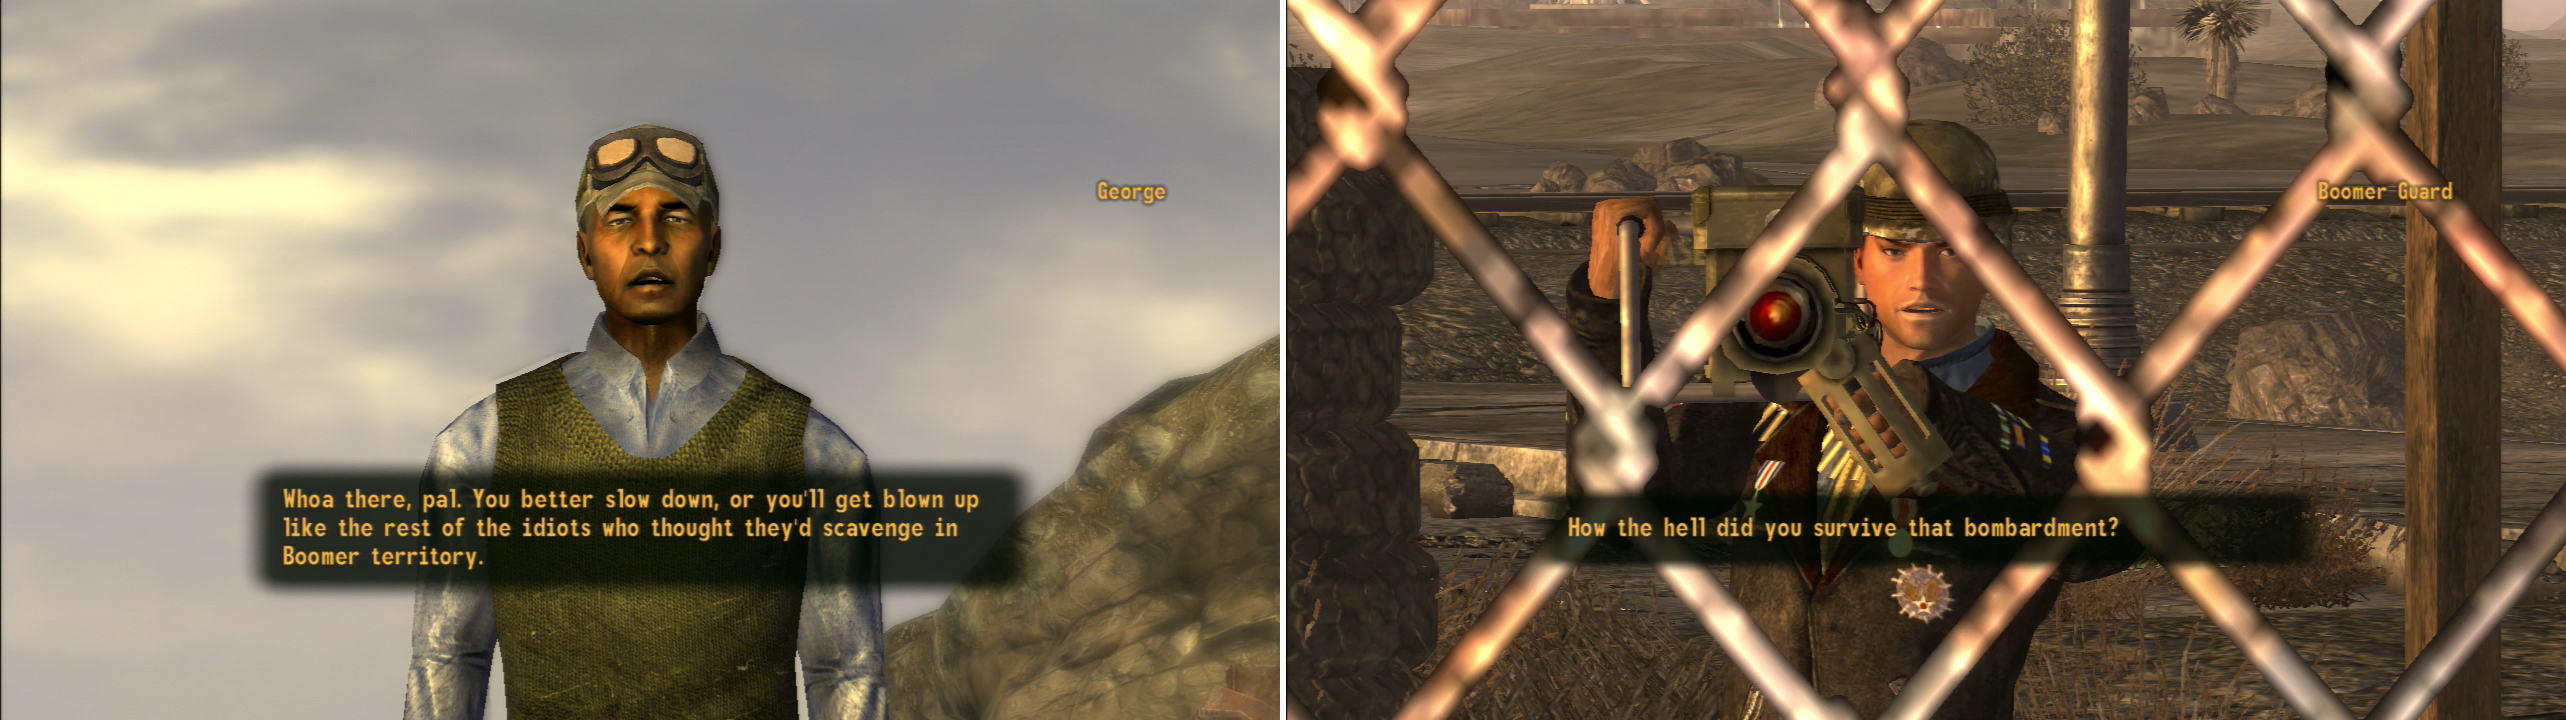 George will warn you of the dangers Boomers present to those who draw near.. and he’ll try to profit from your foolishness (left). If you make it past the artillery fire, you’ll be granted access to Nellis AFB (right).